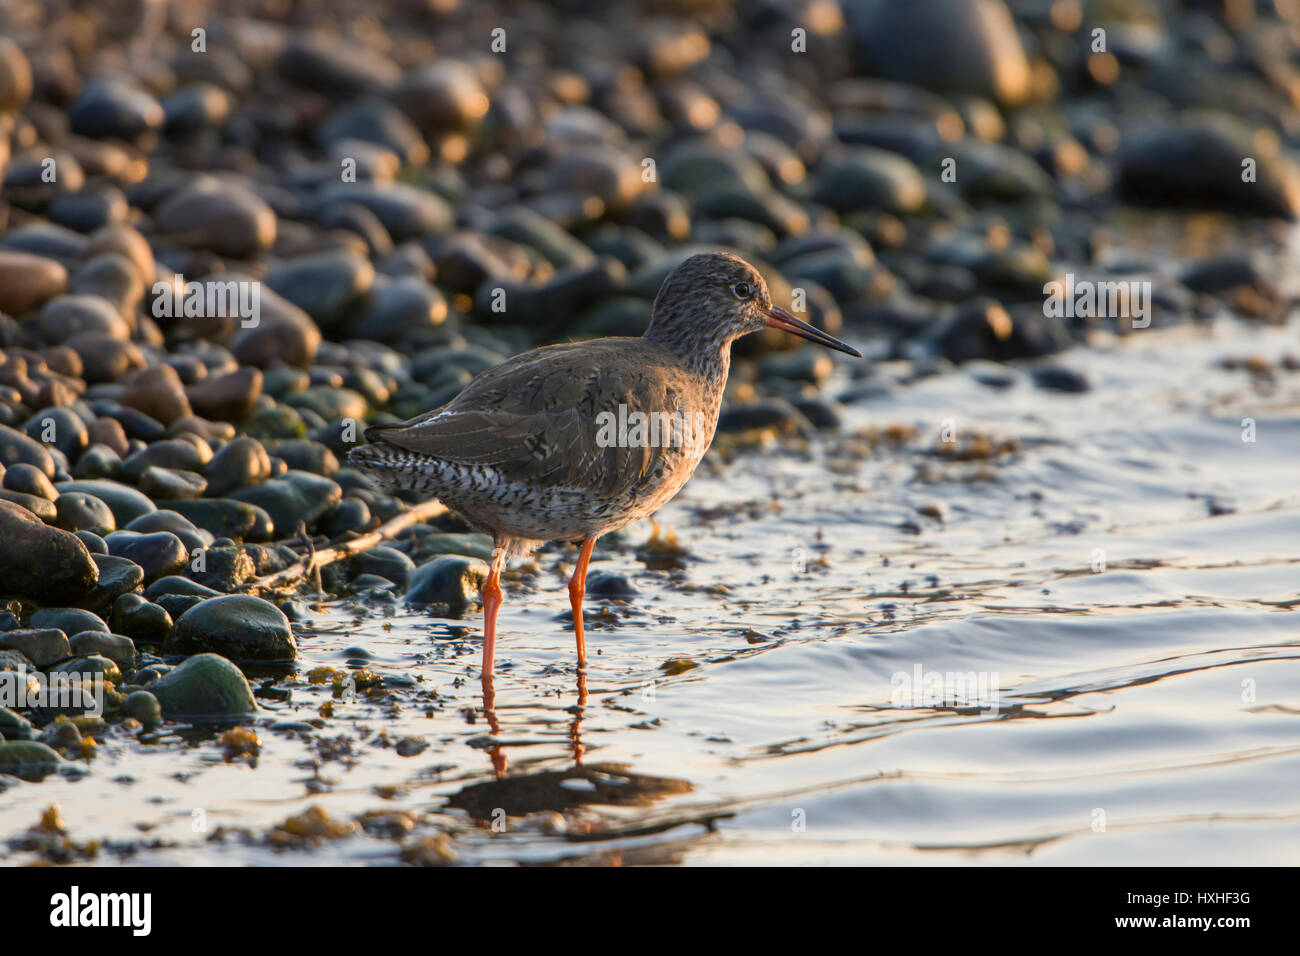 A Common Redshank (Tringa totanus) searching for food at waters edge in morning sun, Rye Harbour nature reserve, East Sussex, UK Stock Photo